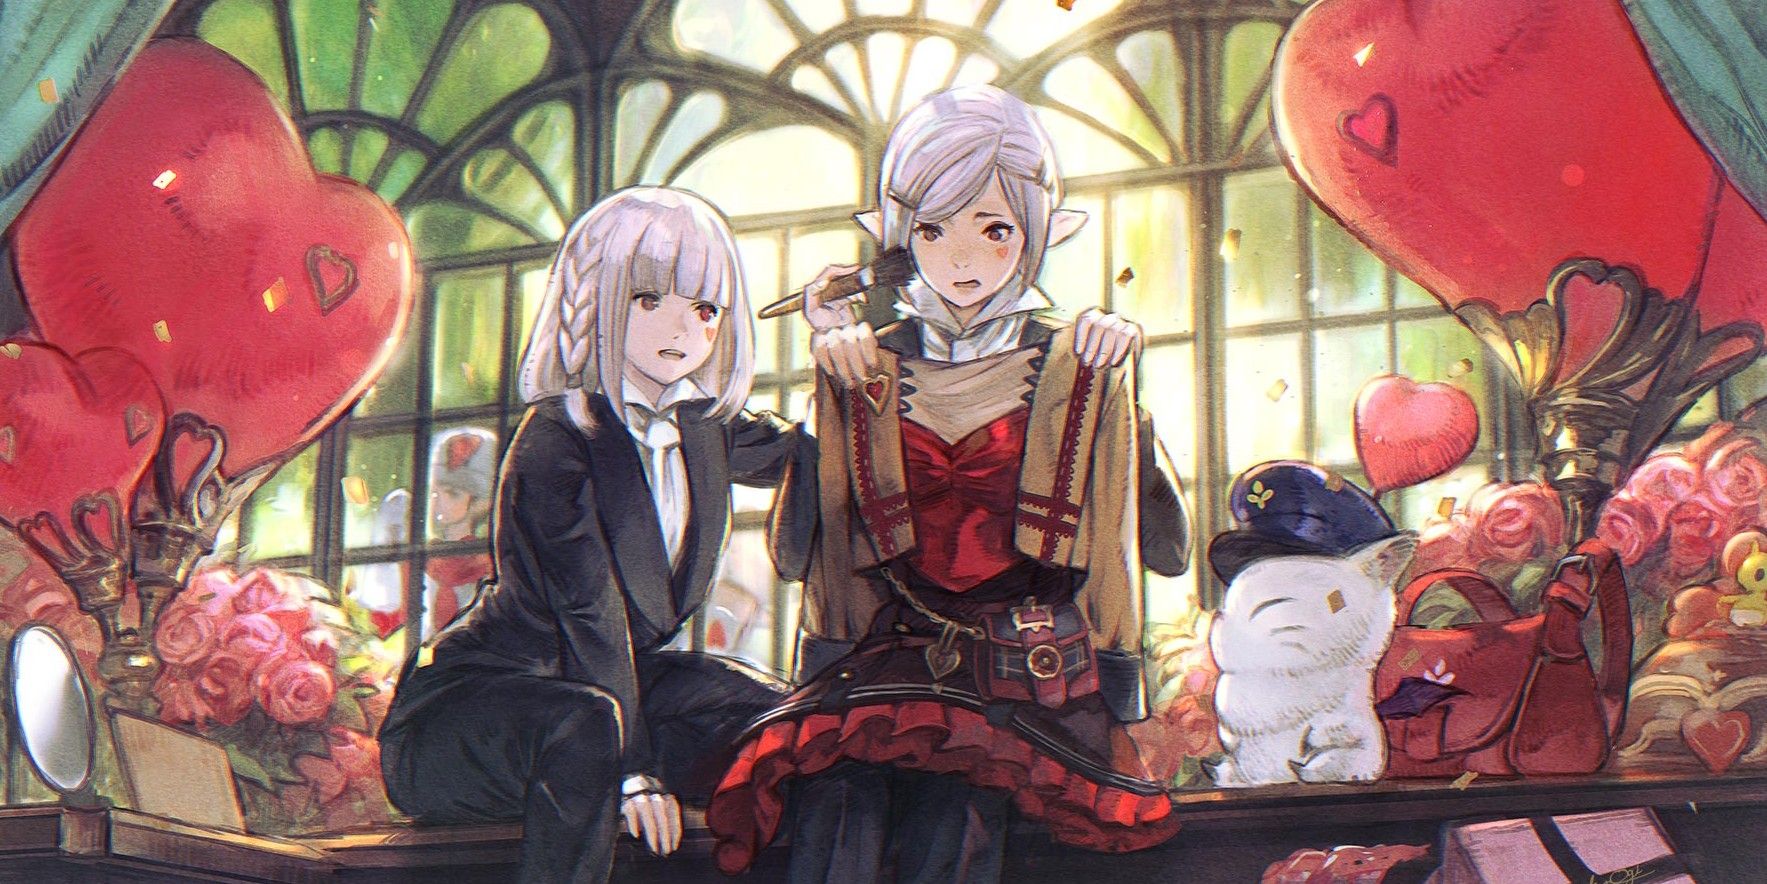 Final Fantasy XIV Valentione's Day 2023 key art, showing two Elezen girls. One of them is holding up the event's dress, while the other one spreads makeup on her face. They are surrounded by heart-shaped balloons and a mailman Moogle.